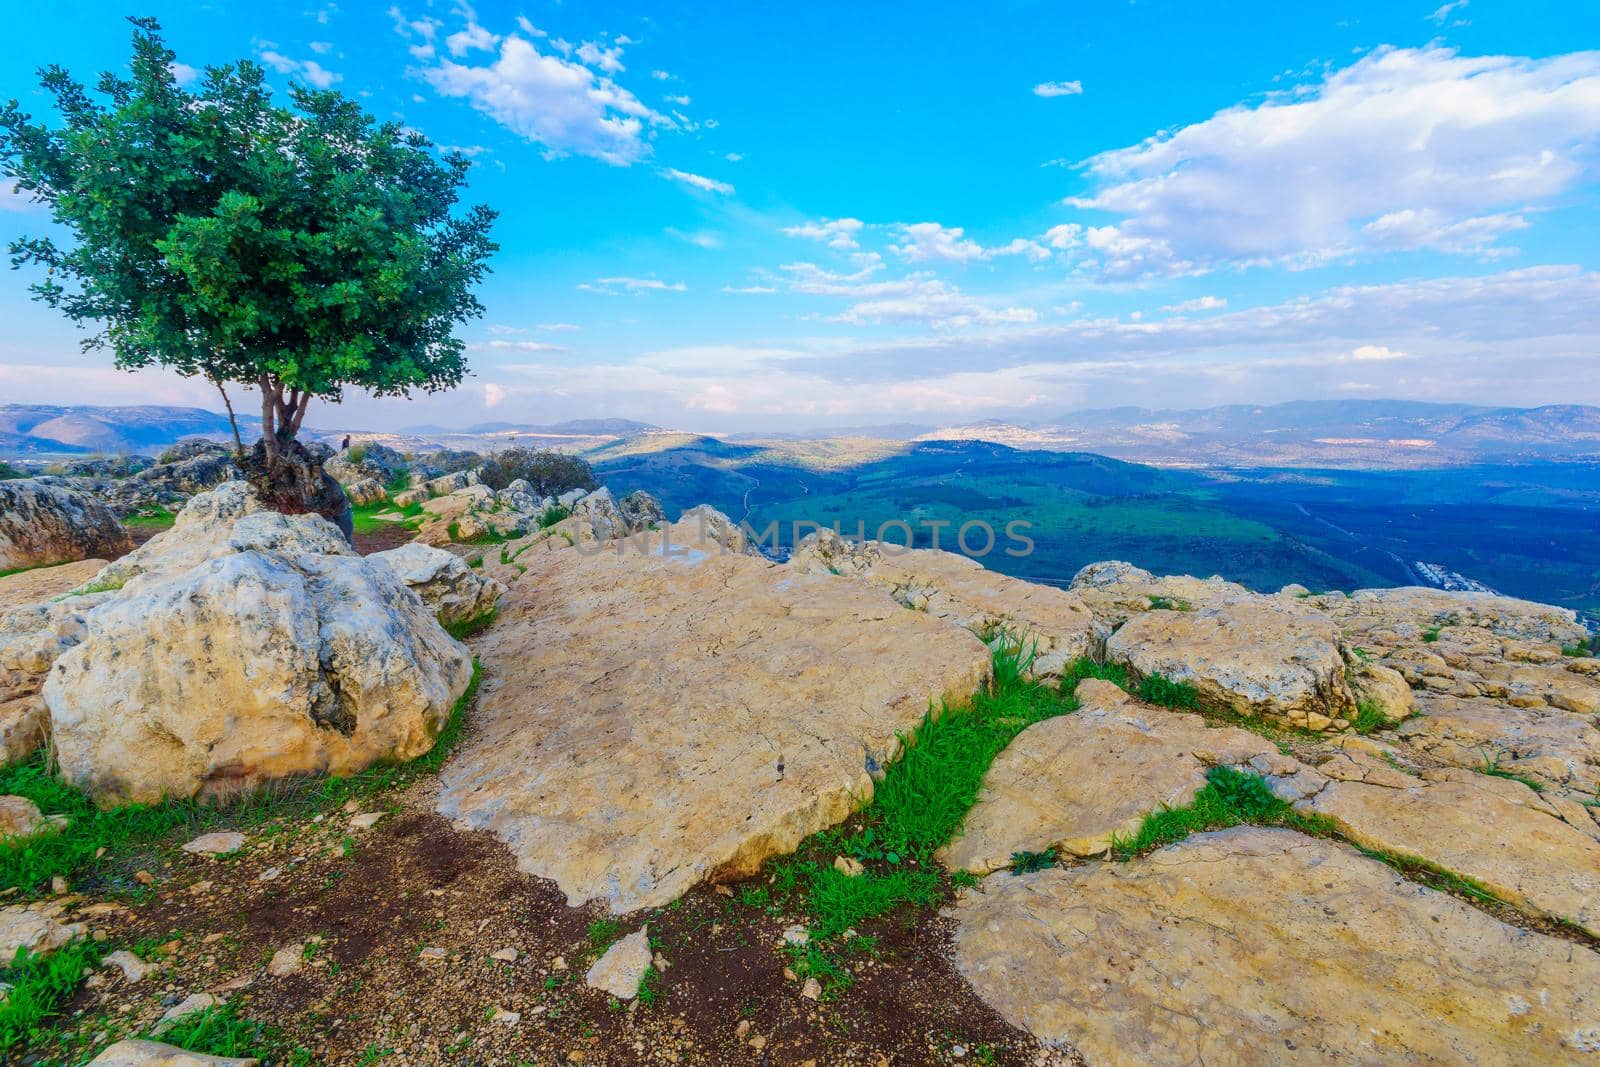 Galilee landscape view from mount Arbel, northern Israel